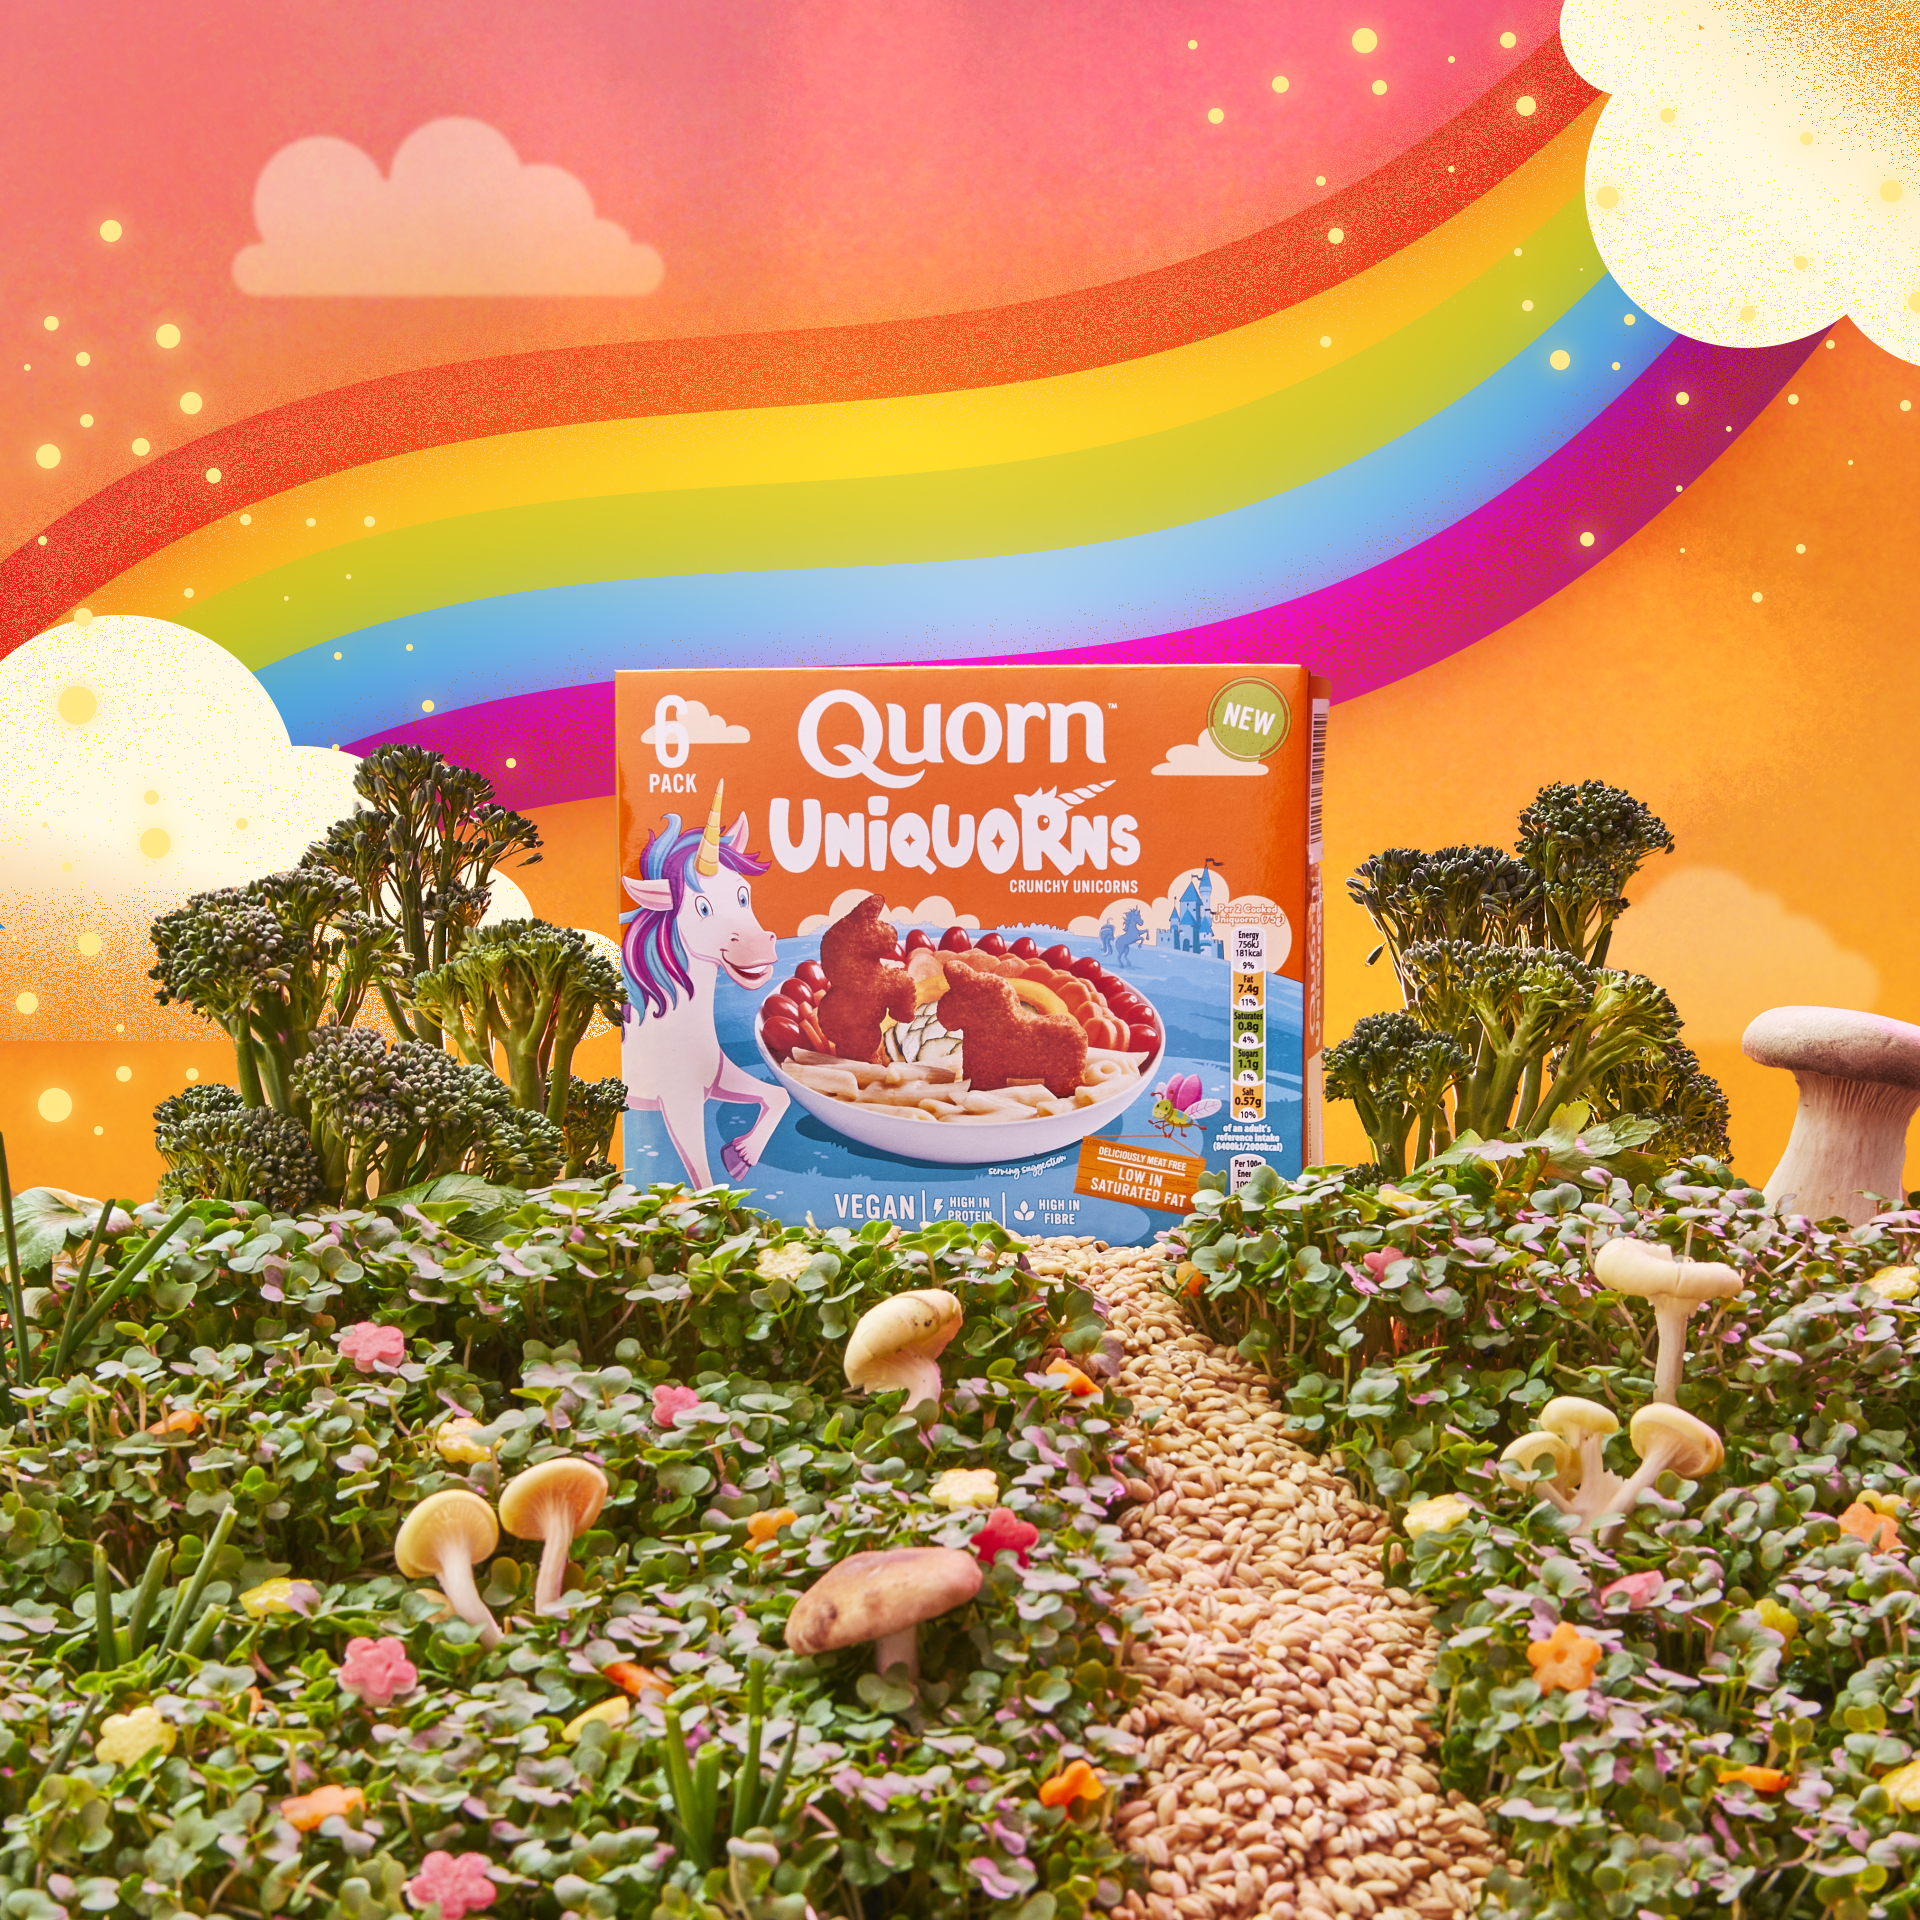 UniQuorn product in a mountain of greens